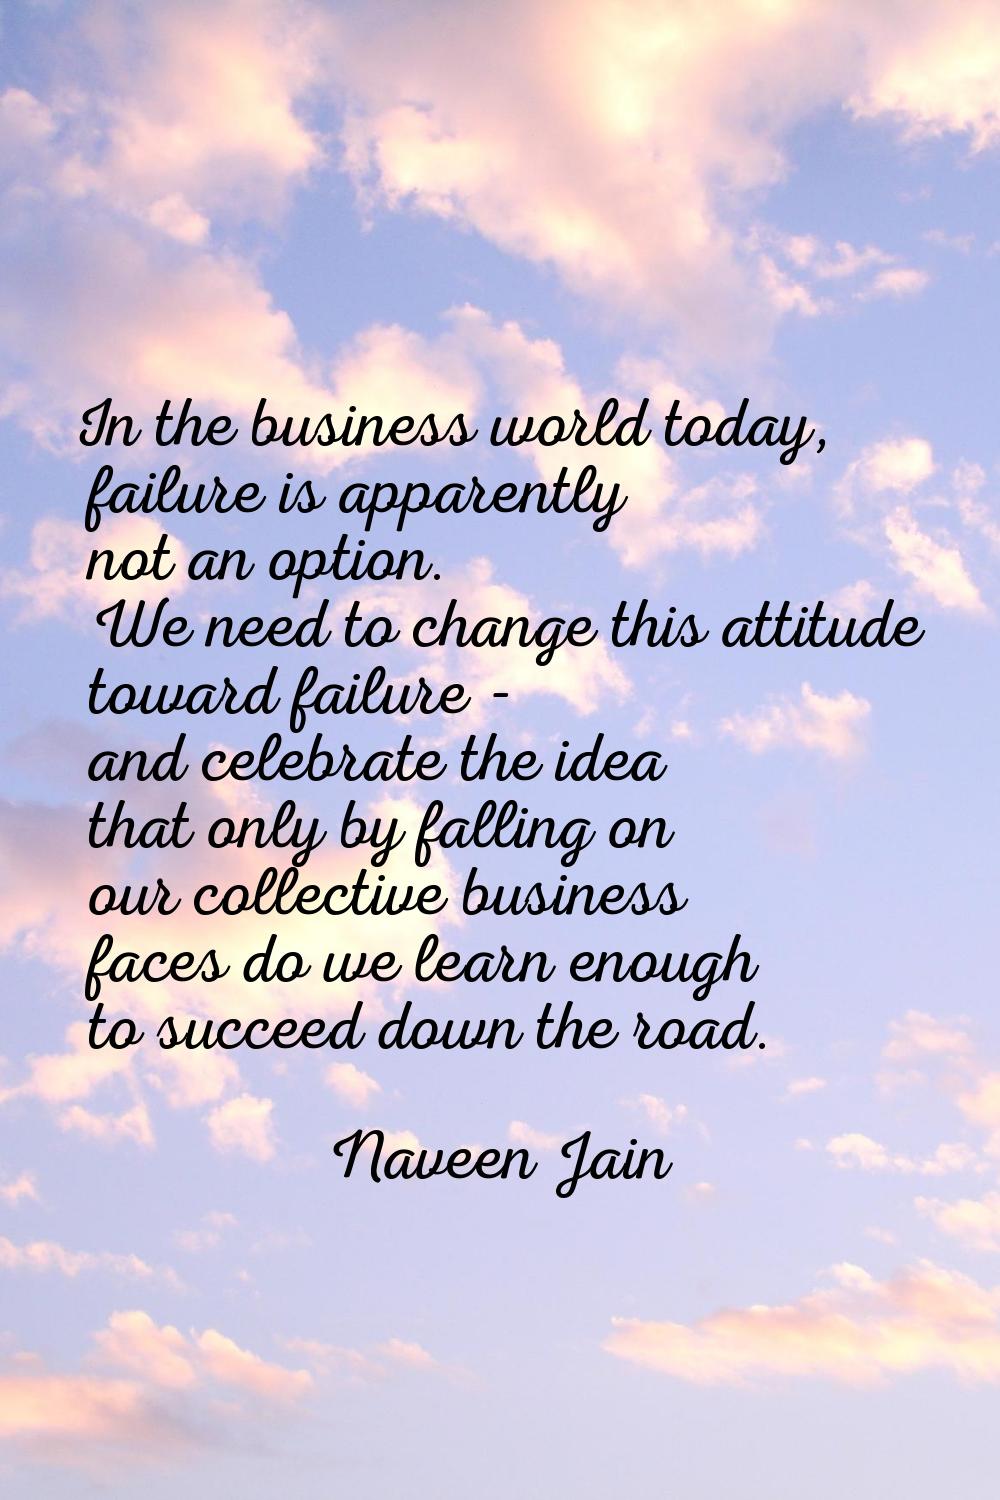 In the business world today, failure is apparently not an option. We need to change this attitude t